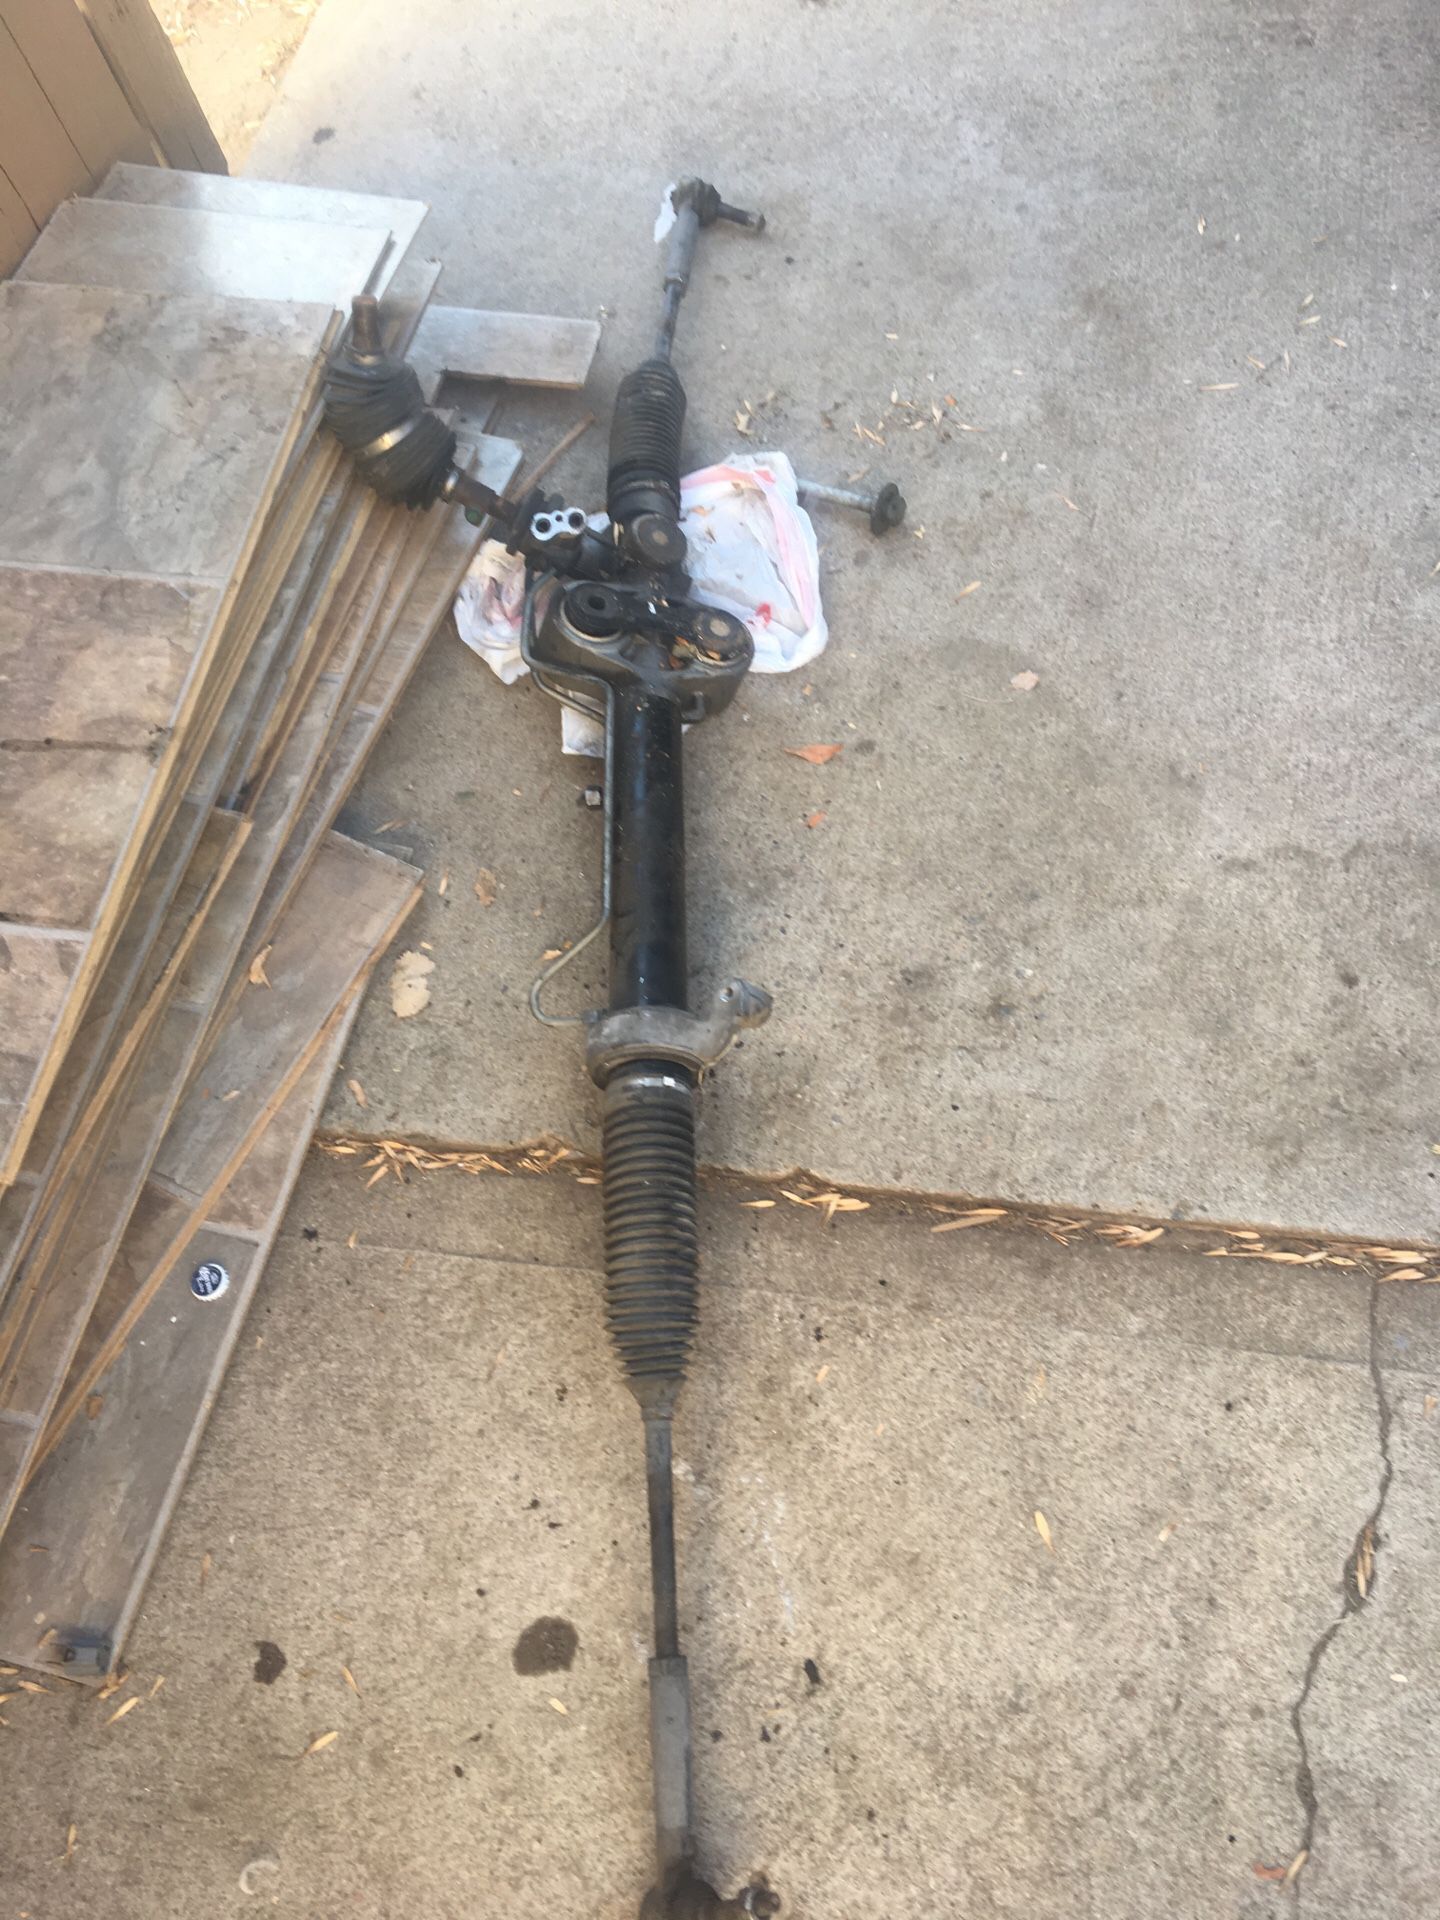 Part for a 2007 GMC in good condition. $300